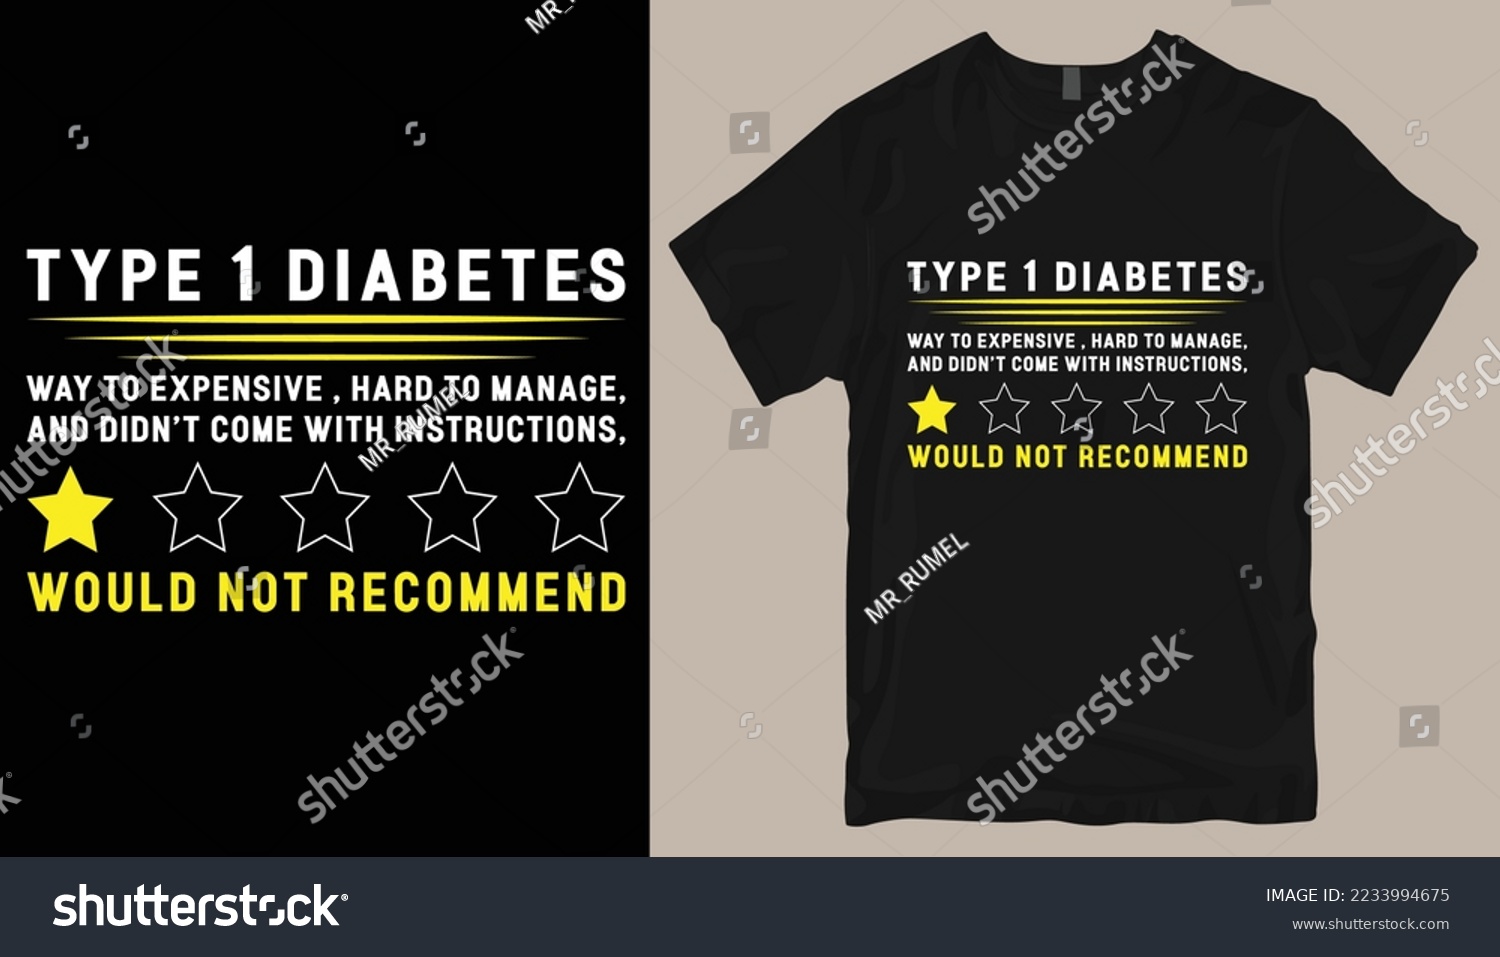 SVG of type 1 diabetes way to expensive , hard to manage and didn't come with instructions would not recommend t shirt design . svg